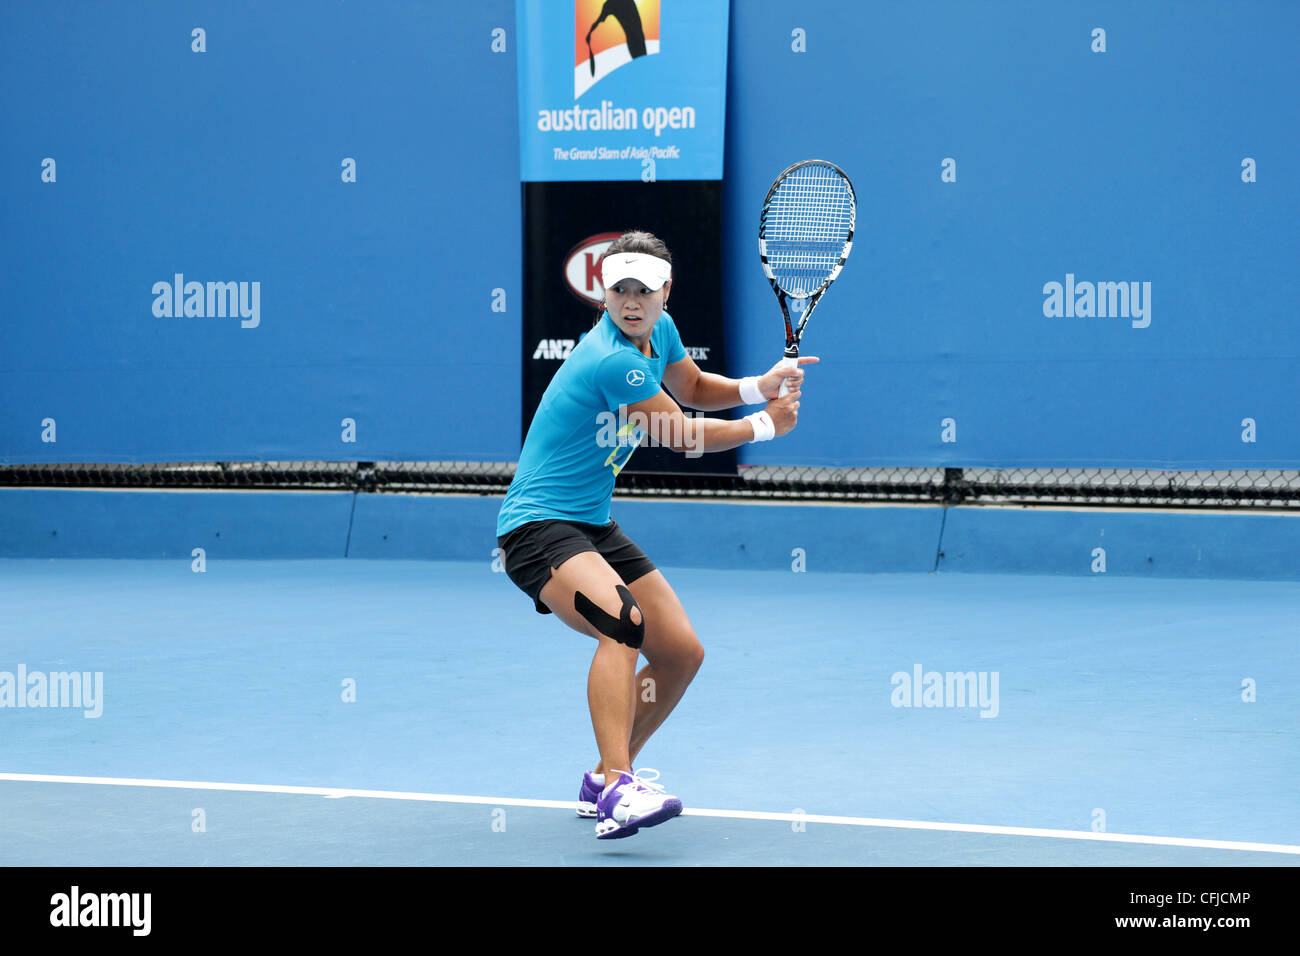 MELBOURNE, AUSTRALIA - JANUARY 21, 2012: WTA world number 4 tennis player Li Na hits on a practice court in Melbourne. Stock Photo